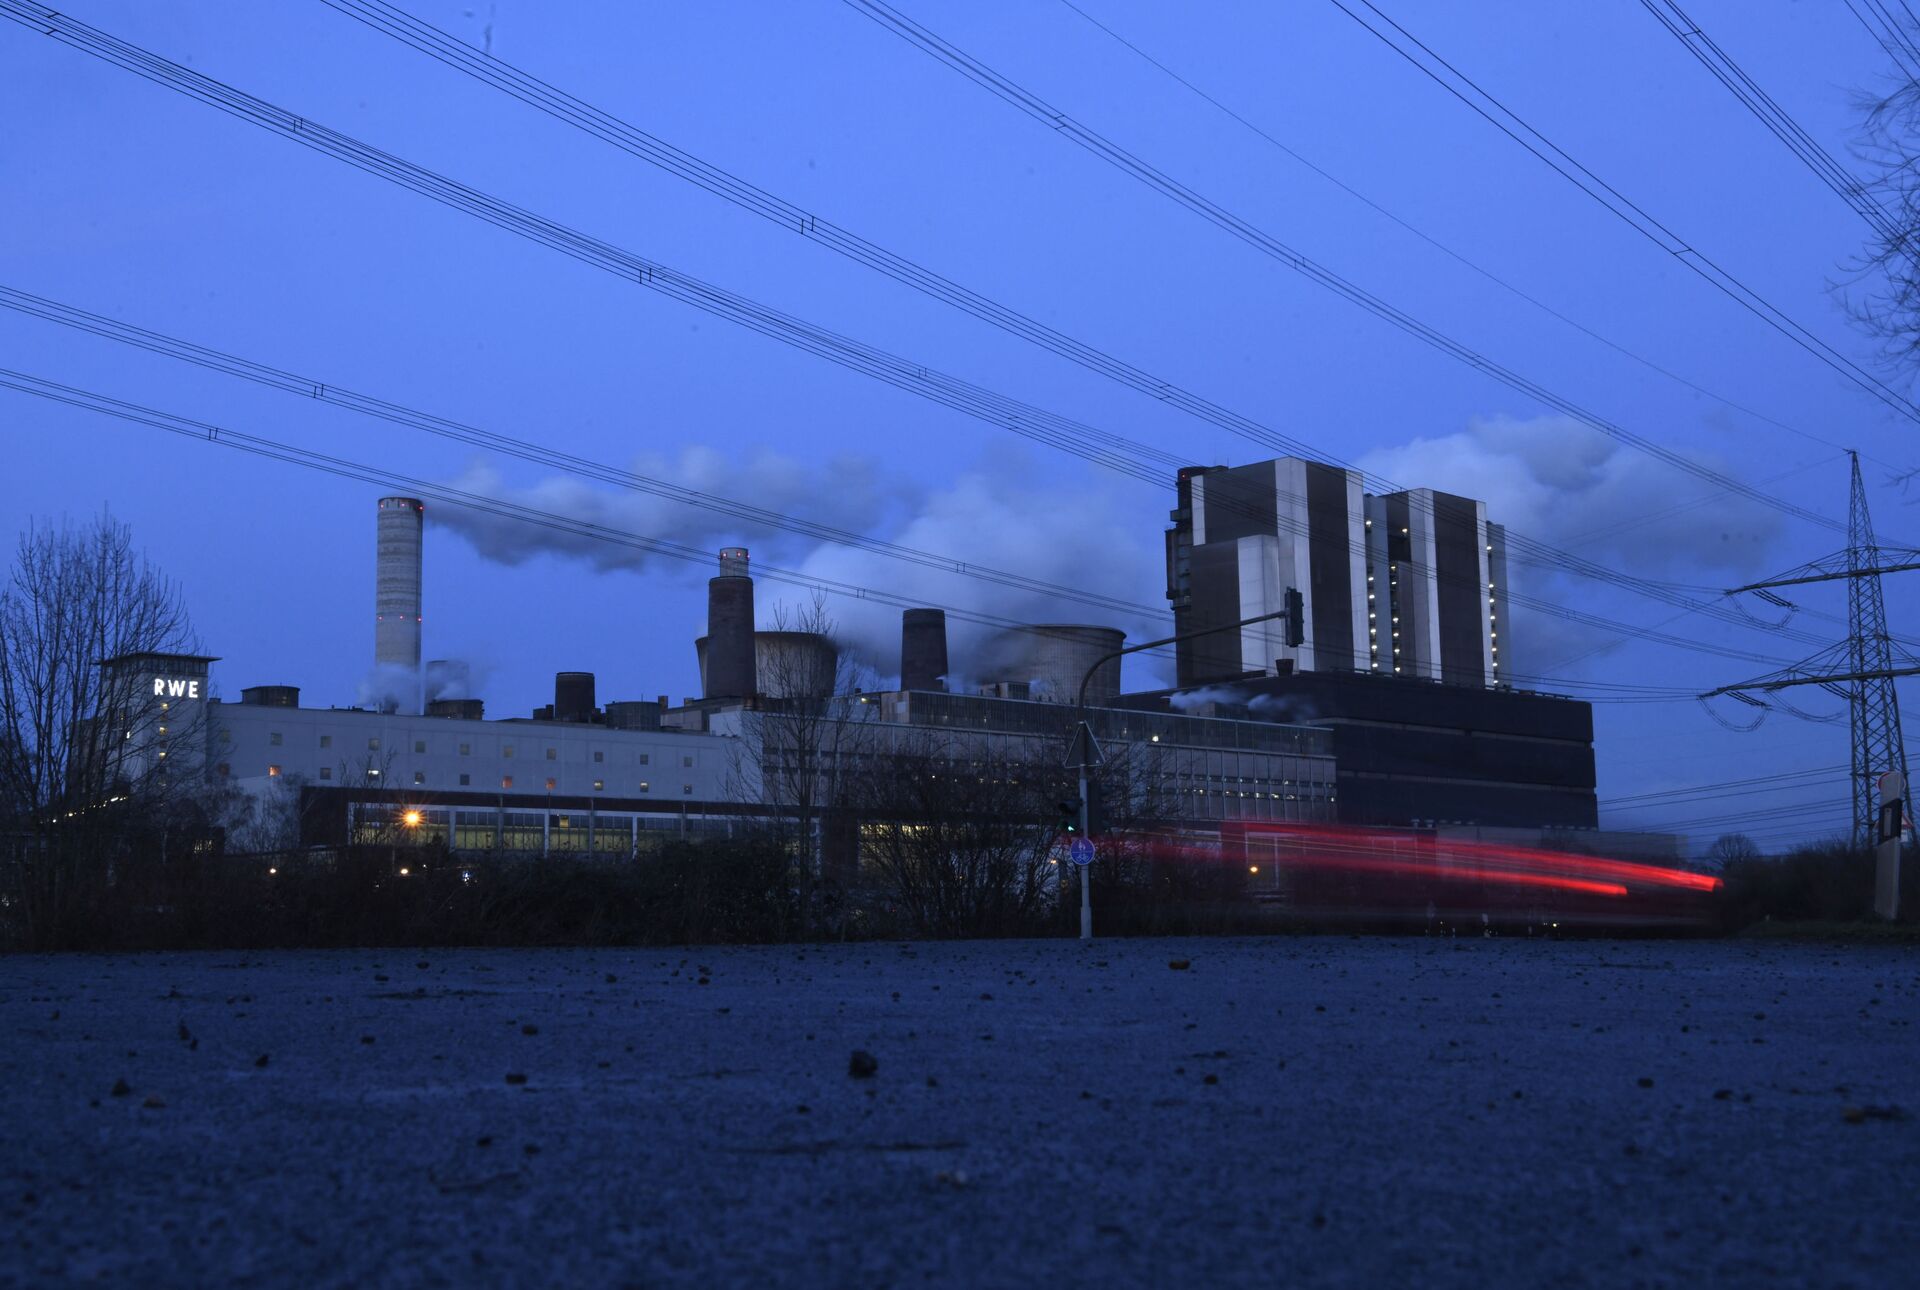 The picture shows a coal power plant of German energy giant RWE in Weisweiler, western Germany, on January 29, 2020. - Sputnik International, 1920, 01.08.2022